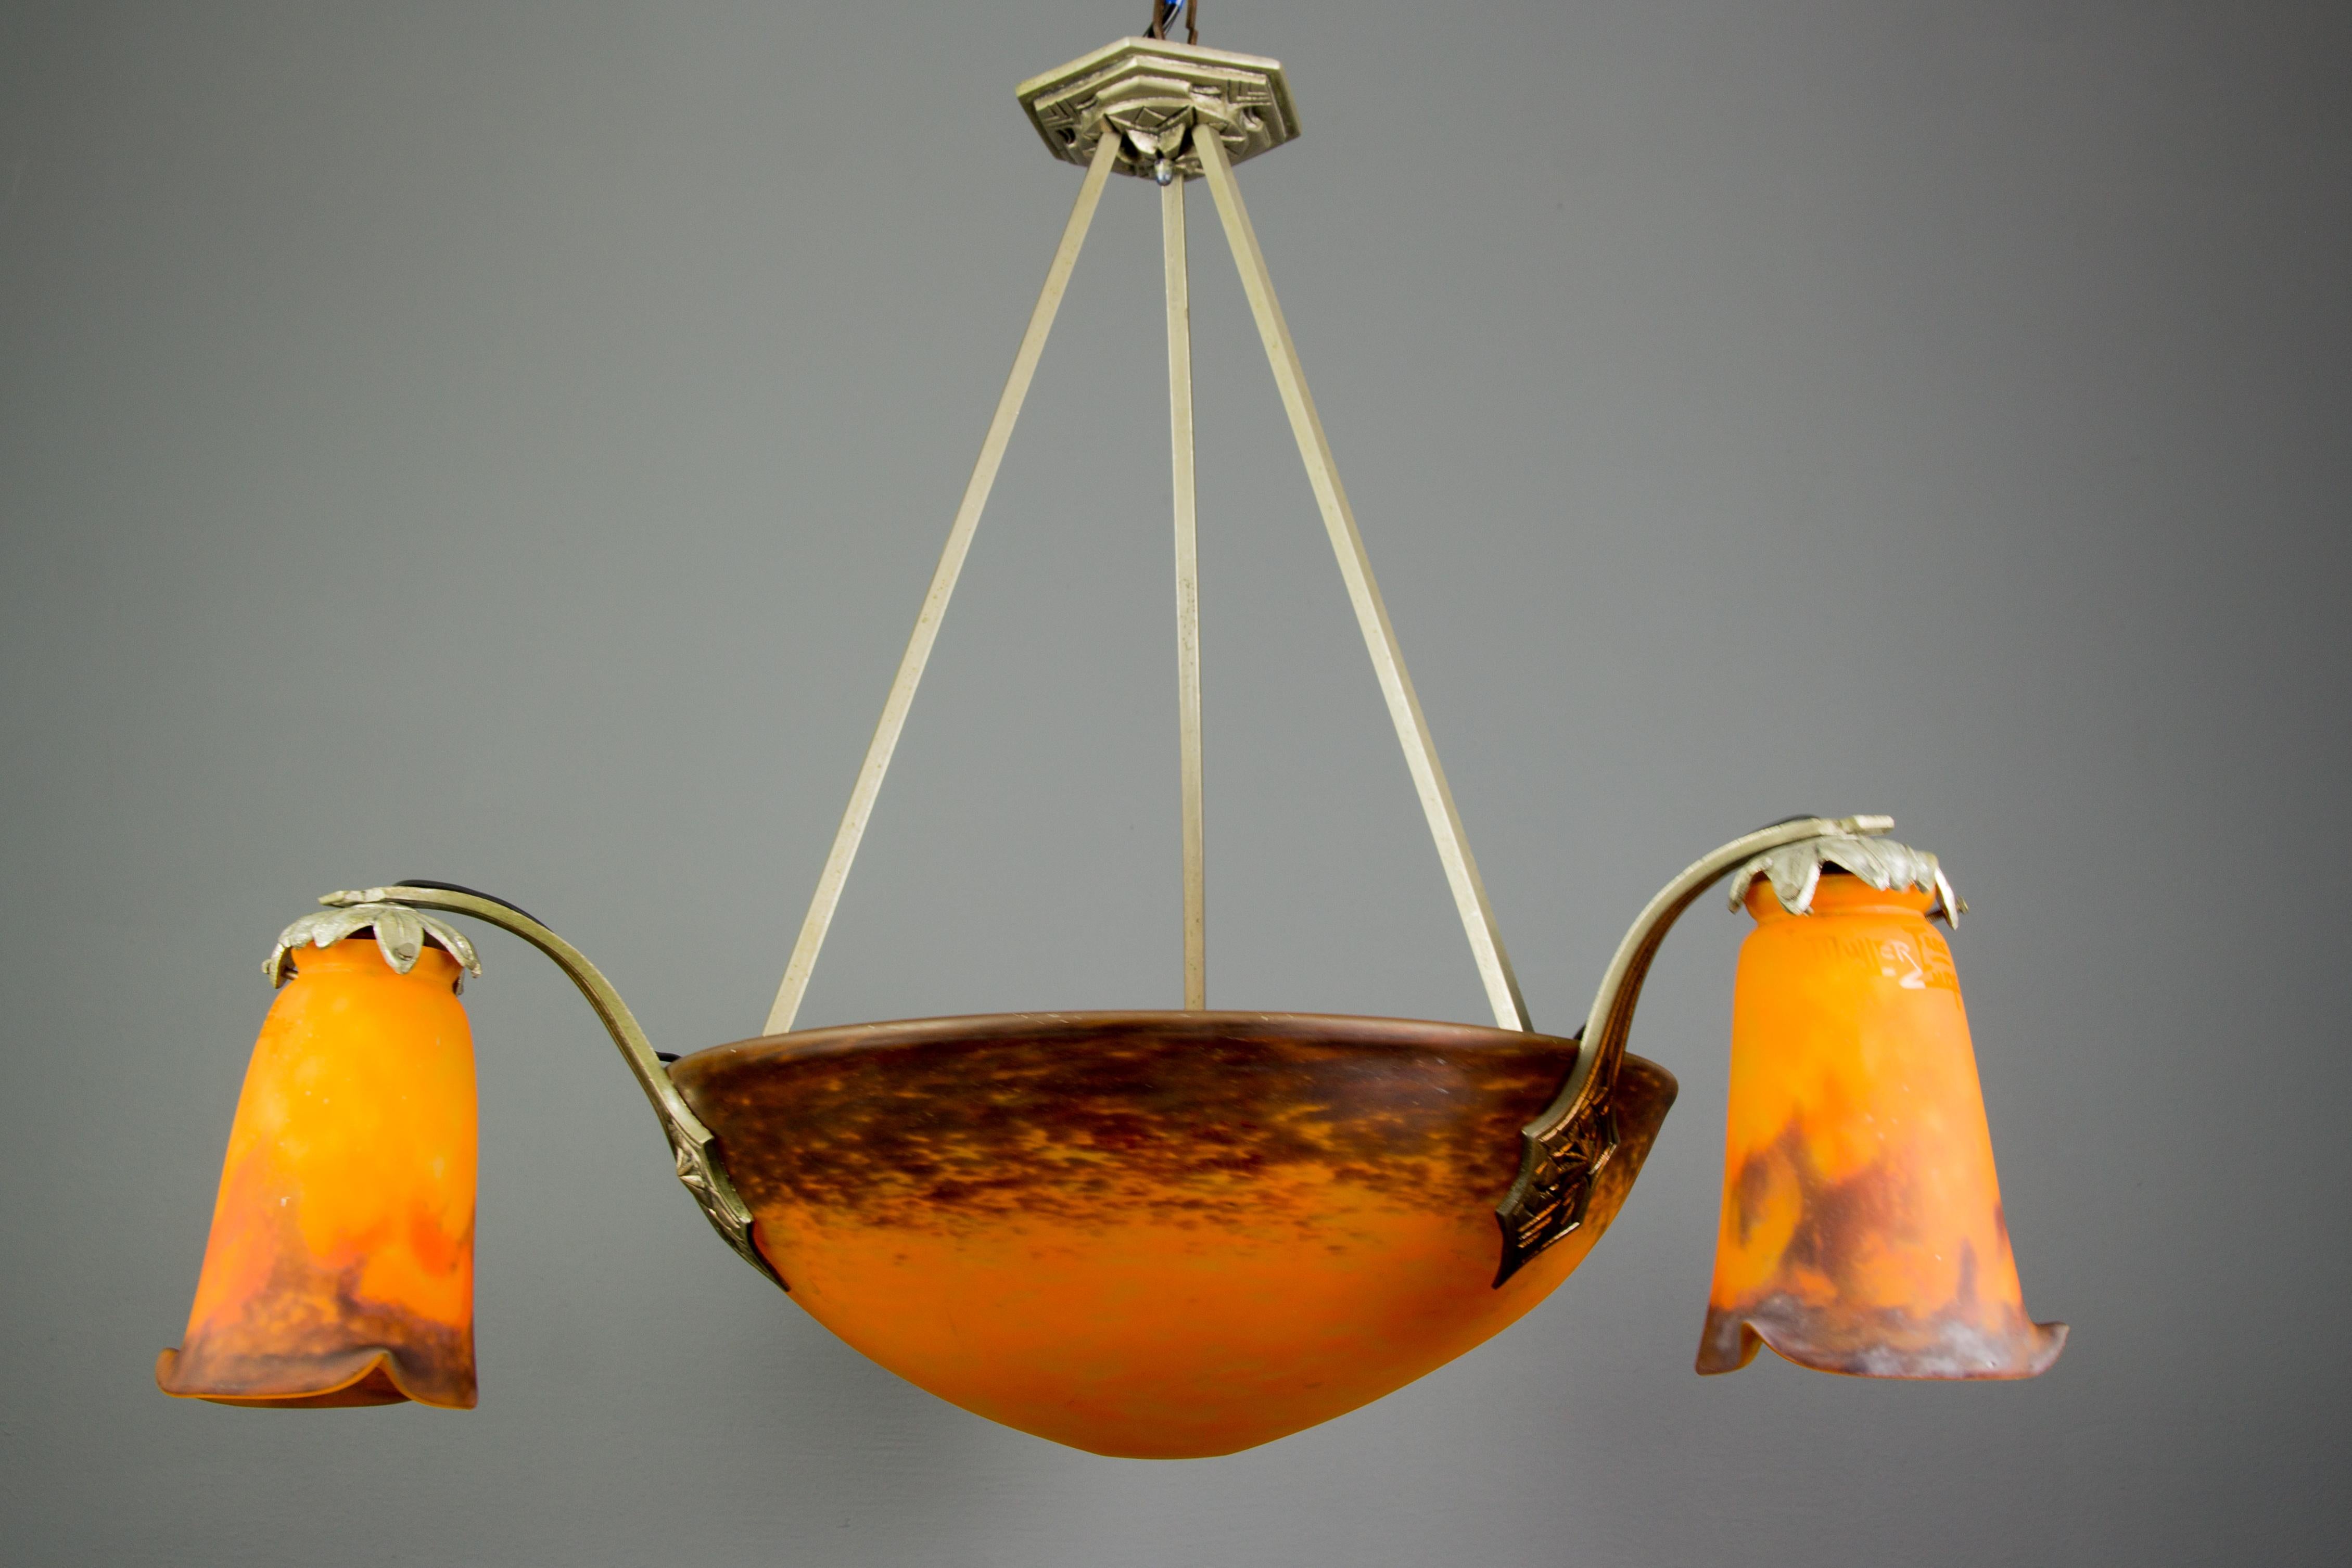 Superb chandelier by the Muller Frères brothers, from circa the 1920s, consisting of a central Pâte de Verre glass bowl shade and three surrounding Pâte de Verre glass shades, glass is signed 